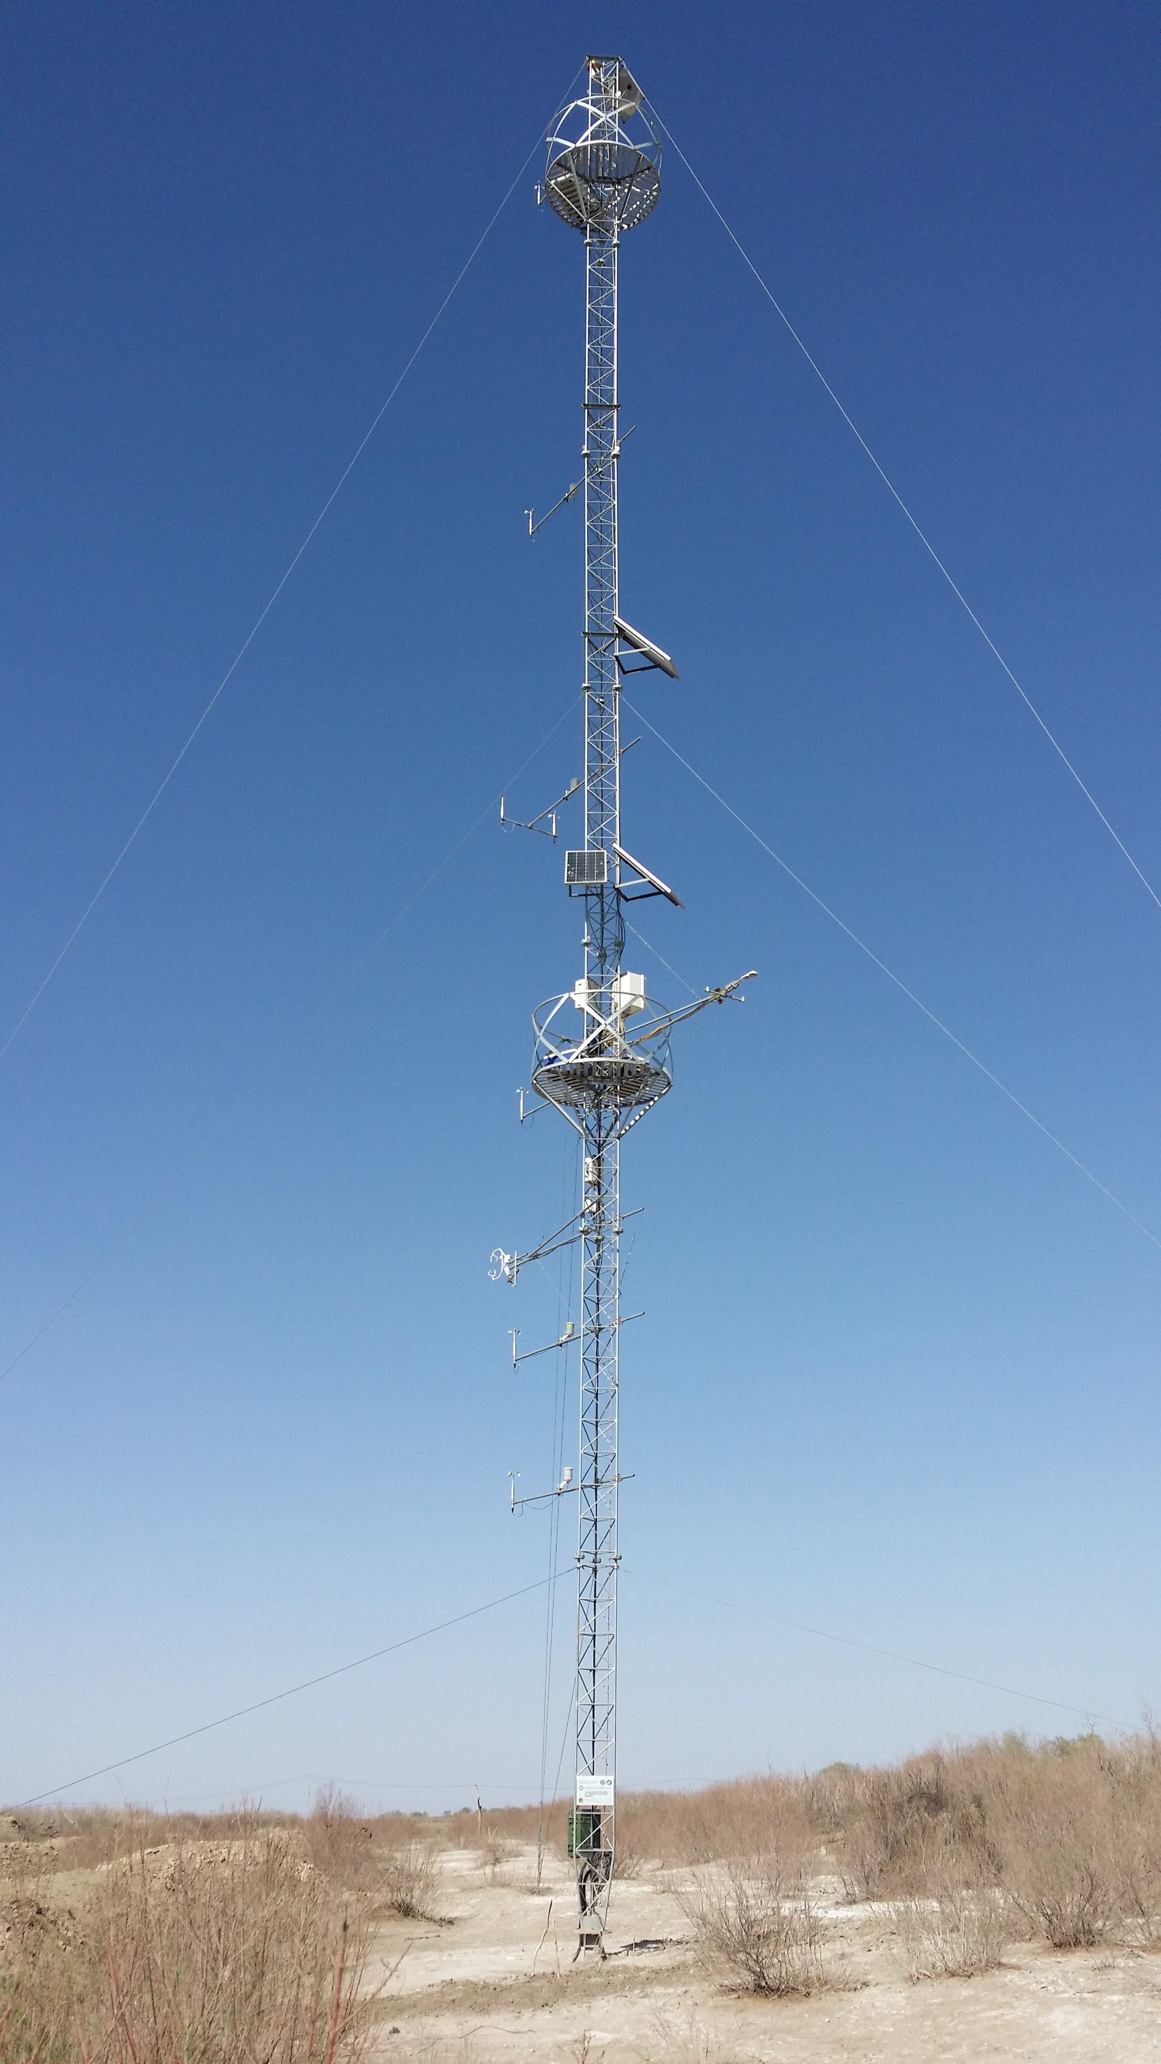 Qilian Mountains integrated observatory network: Dataset of Heihe integrated observatory network (eddy covariance system of Sidaoqiao superstation, 2021)